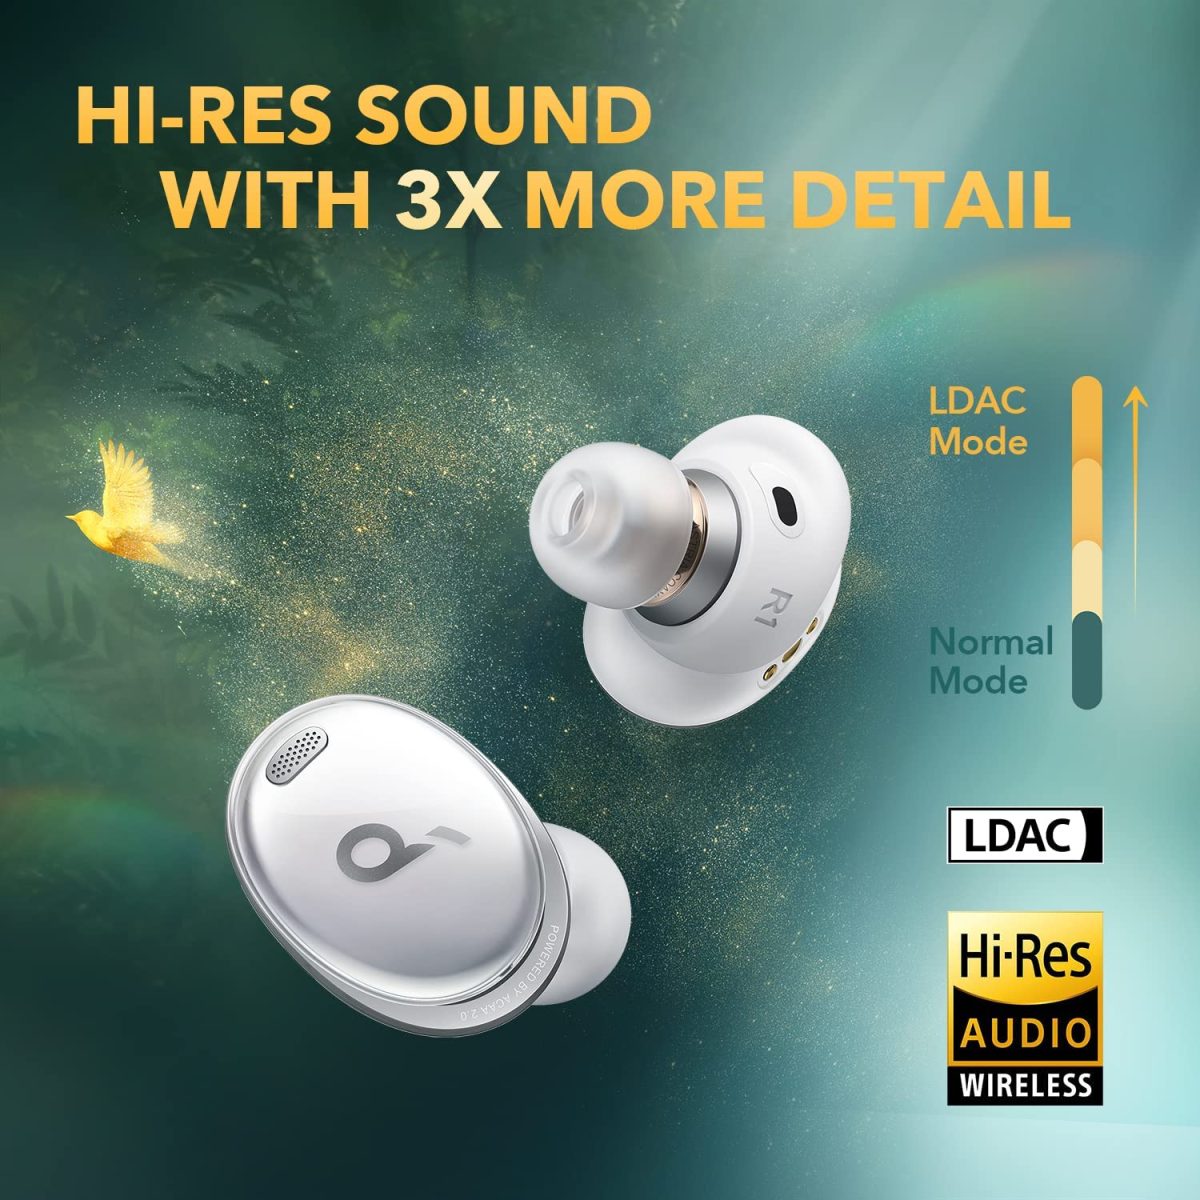 71Wefzrjybl. Ac Sl1500 Soundcore &Lt;H1 Id=&Quot;Title&Quot; Class=&Quot;A-Size-Large A-Spacing-None&Quot;&Gt;Anker Soundcore Liberty Air 3 Pro True Wireless Earbuds - White&Lt;/H1&Gt; Https://Www.youtube.com/Watch?V=Bguj4K07Ruy &Lt;Ul&Gt; &Lt;Li&Gt;&Lt;B&Gt;Acaa 2.0:  &Lt;/B&Gt;Our Exclusive Coaxial Dual Driver Technology Delivers High And Low Frequency Sound Directly To Your Ear Without Interference. Its Wide Soundstage Is Detailed And Spacious, Bass Has A Deep Punch, Mids Are Luscious, And Treble Sparkles.&Lt;/Li&Gt; &Lt;Li&Gt;&Lt;B&Gt;Personalized Noise Cancelling:  &Lt;/B&Gt;Standard Noise Cancelling Only Adjusts Noise Based On Data. Hearid Anc Analyzes Your Ears And Level Of In-Ear Pressure To Create A Tailored Profile That Optimizes Noise Reduction And Reduces External Sound To Suit Your Ears.&Lt;/Li&Gt; &Lt;Li&Gt;&Lt;B&Gt;Fusion Comfort Fit:  &Lt;/B&Gt;Liberty 3 Pro’s Earbuds Have A Triple-Point Ergonomic Shape And Built-In Ear Pressure Relief For All-Day Comfort. 4 Sizes Of Liquid Silicone Ear Tips And Flexible Ear Wings Ensure You Get A Strong Seal And Secure Grip.&Lt;/Li&Gt; &Lt;Li&Gt;&Lt;B&Gt;Up To 32 Hours Of Playtime:  &Lt;/B&Gt;Enjoy Up To 8 Hours Of Music From A Single Charge, Plus Get 3 Full Charges From The Compact Charging Case To Extend The Playtime Even Further. Recharge The Case Via Usb-C Cable Or Wireless Charger.&Lt;/Li&Gt; &Lt;/Ul&Gt; &Lt;H5&Gt;Warranty: Anker Product Warranty&Lt;/H5&Gt; &Lt;Pre&Gt;&Lt;B&Gt;We Also Provide International Wholesale And Retail Shipping To All Gcc Countries: Saudi Arabia, Qatar, Oman, Kuwait, Bahrain.&Lt;/B&Gt;&Lt;/Pre&Gt; Earbuds Anker Soundcore Liberty Air 3 Pro True Wireless Earbuds - White